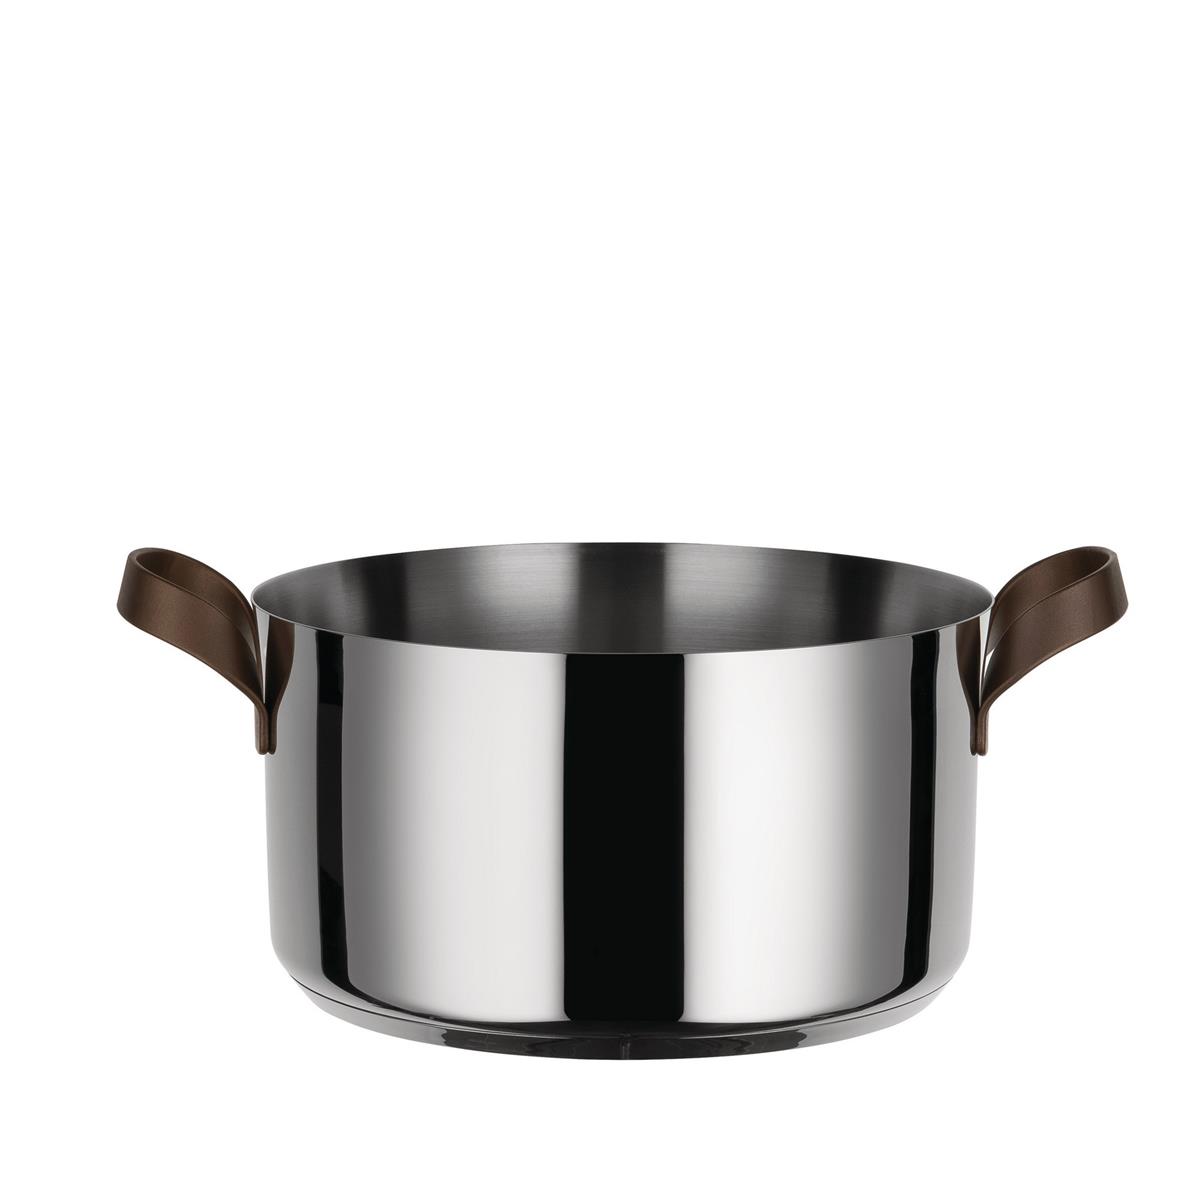 Alessi-Pots & Pans Casserole in 18/10 stainless steel suitable for induction